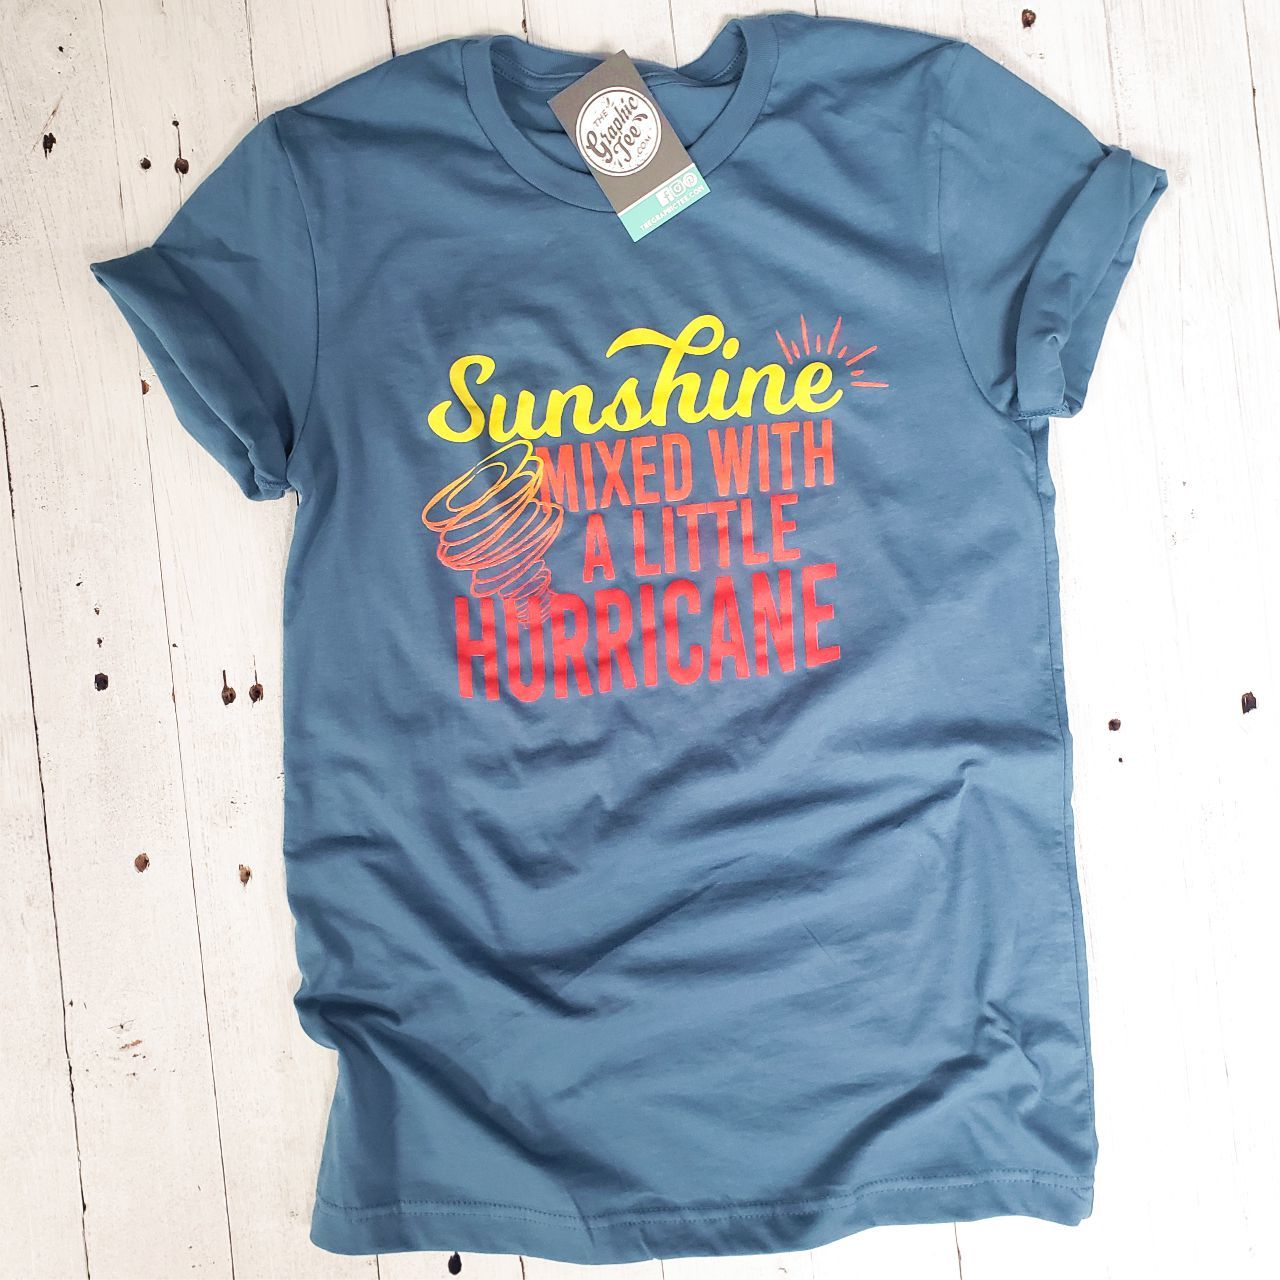 Sunshine Mixed with a Little Hurricane - Unisex Tee - The Graphic Tee